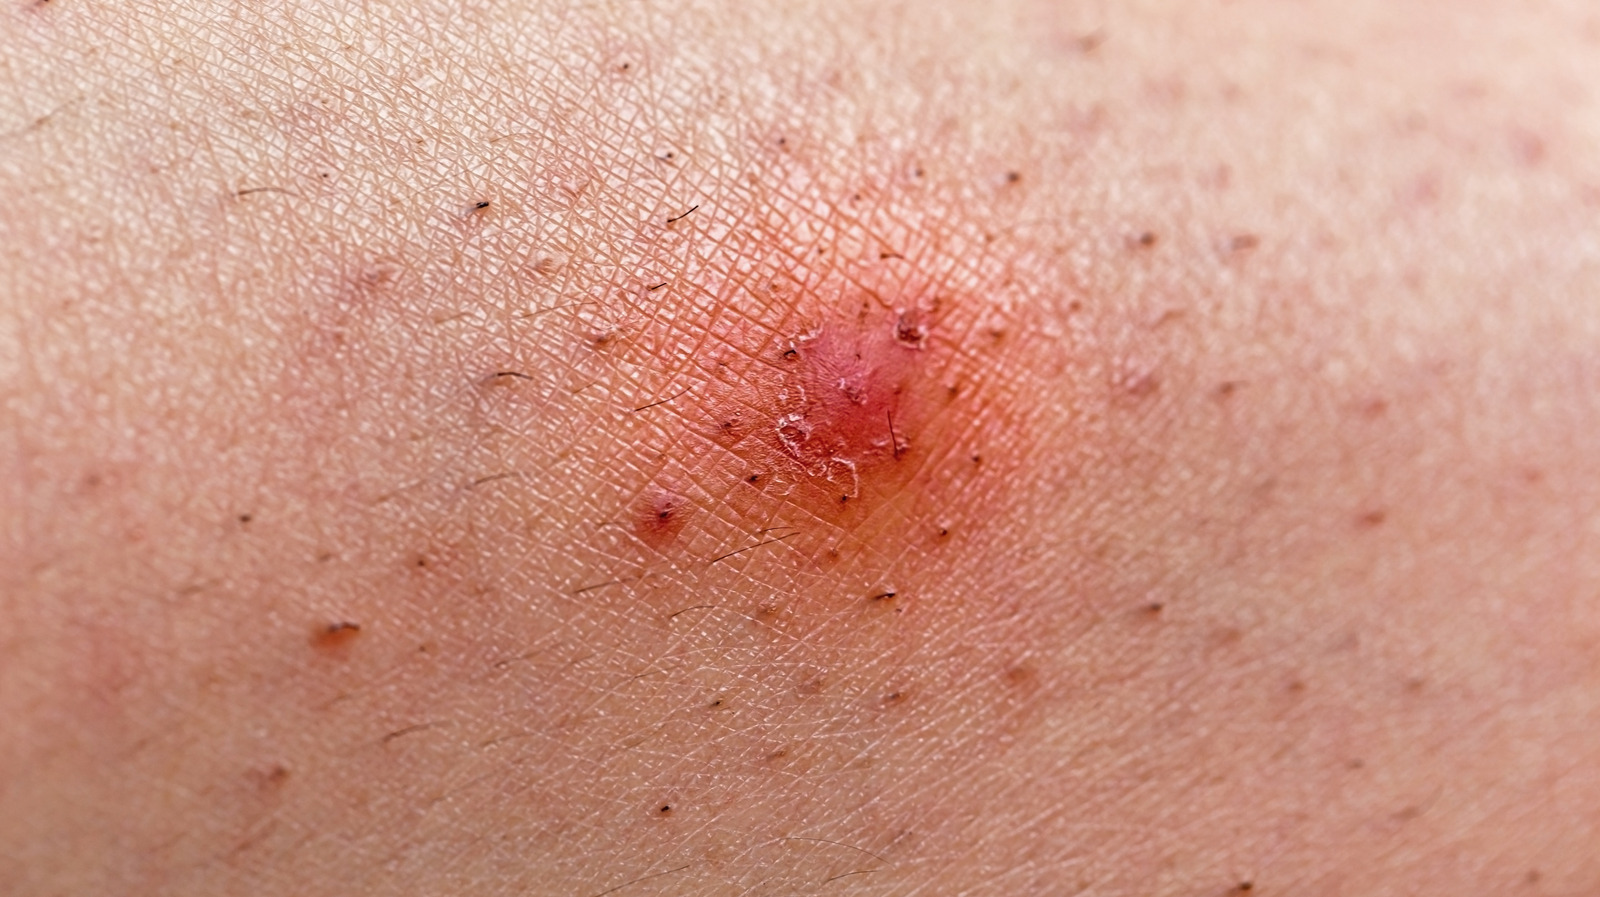 When To See Your Doctor About An Infected Ingrown Hair